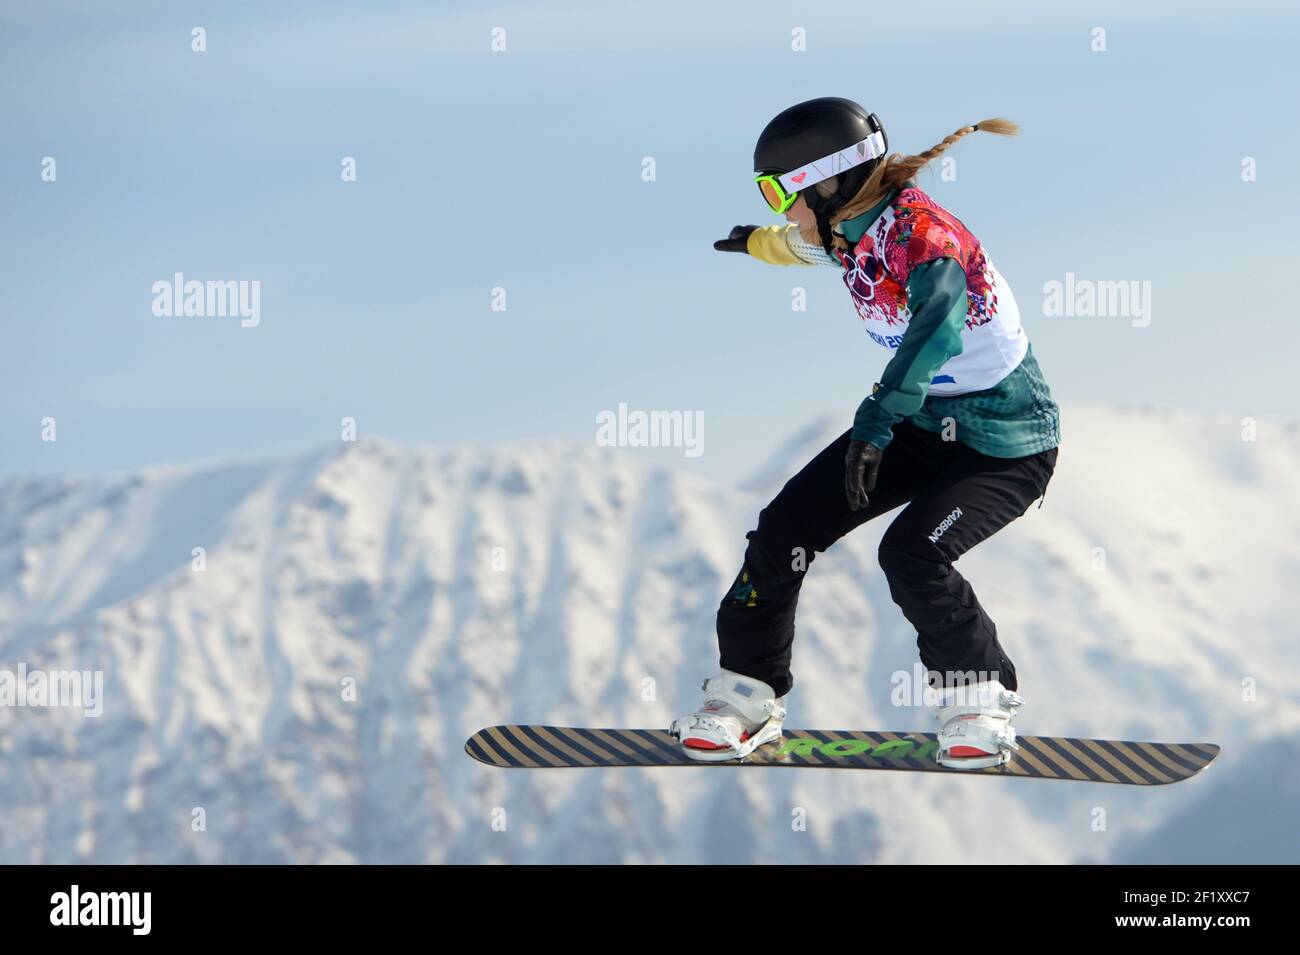 Torah Bright from Australia competes during the women's Snowboard Cross of the XXII Winter Olympic Games Sotchi 2014, at the Rosa Khutor Extreme Park, on February 16, 2014 in Sochi, Russia. Photo Pool KMSP / DPPI Stock Photo